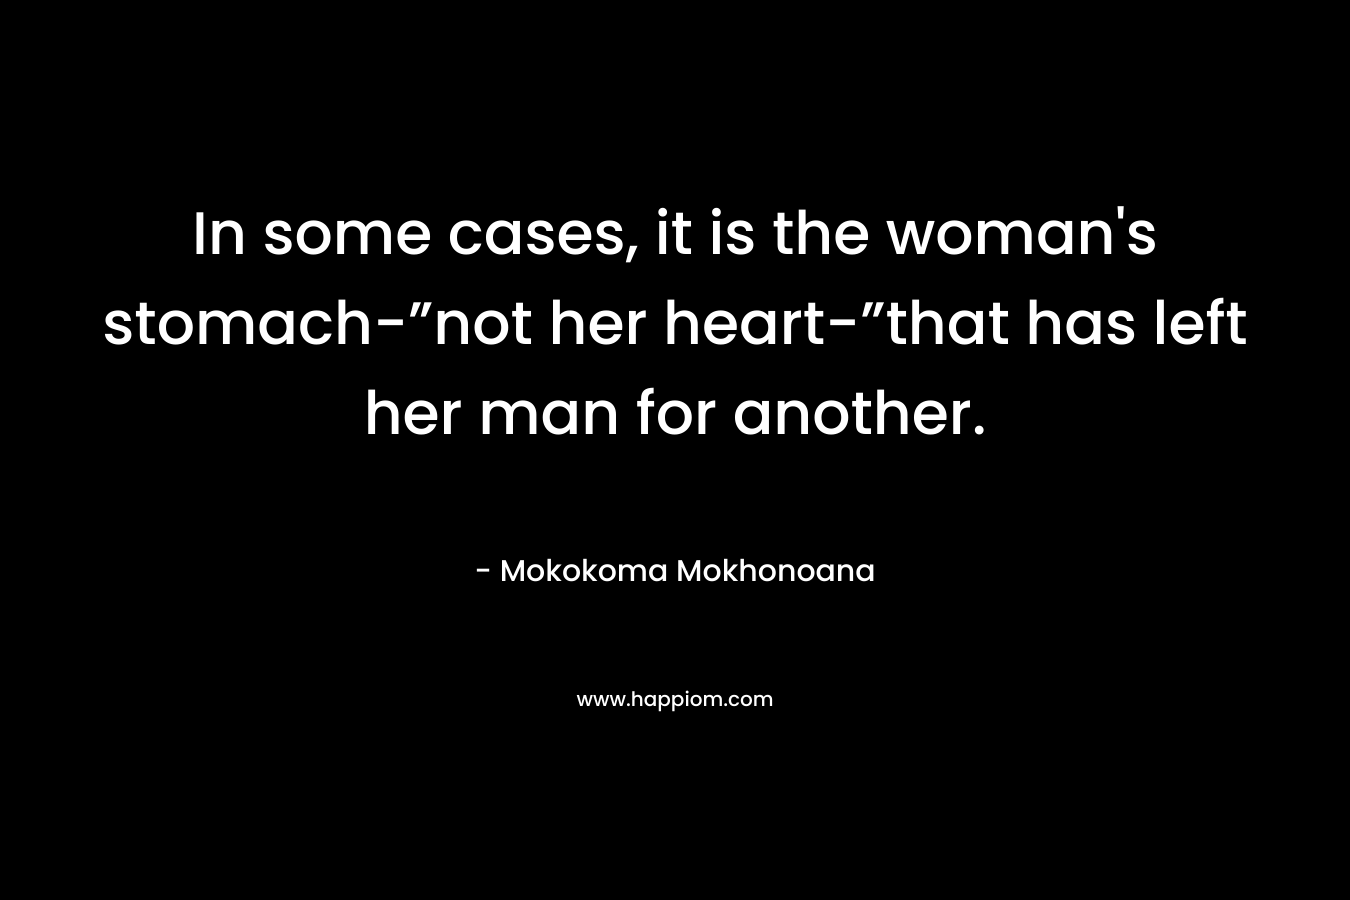 In some cases, it is the woman’s stomach-”not her heart-”that has left her man for another. – Mokokoma Mokhonoana